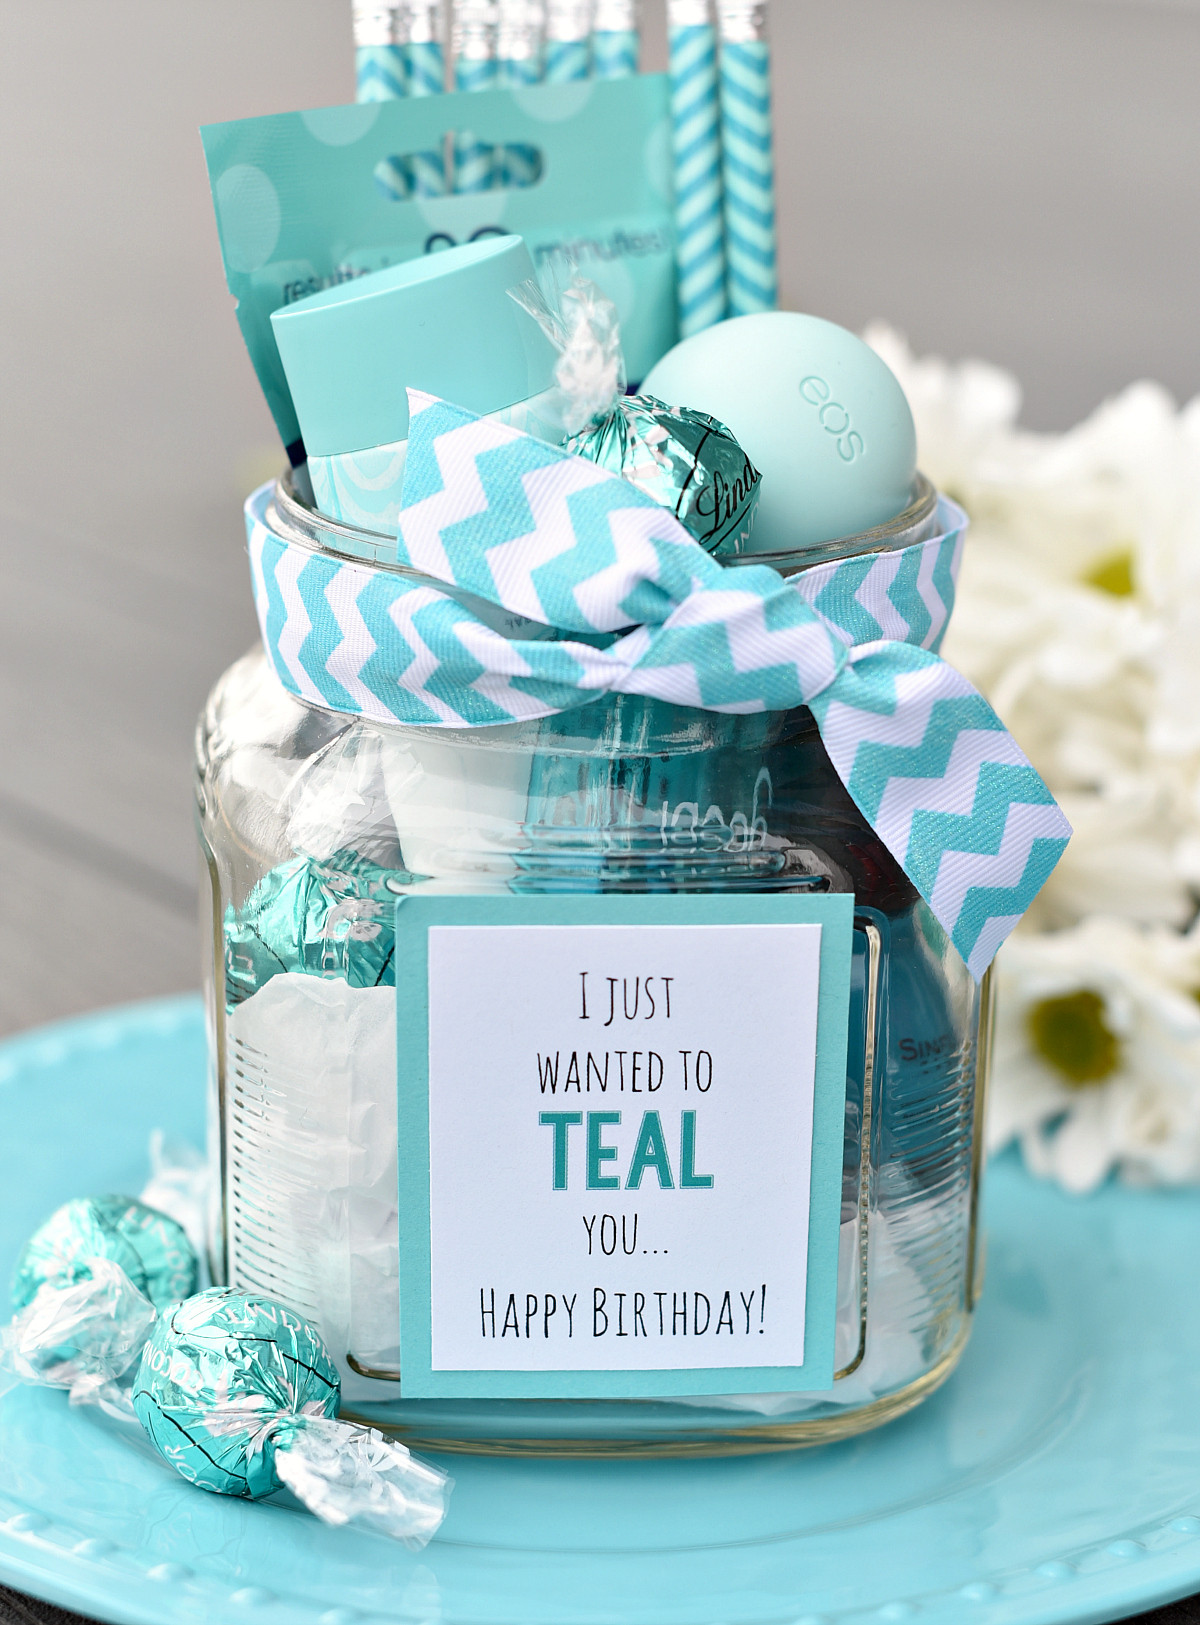 Cute Birthday Gift Ideas For Best Friend
 Teal Birthday Gift Idea for Friends – Fun Squared